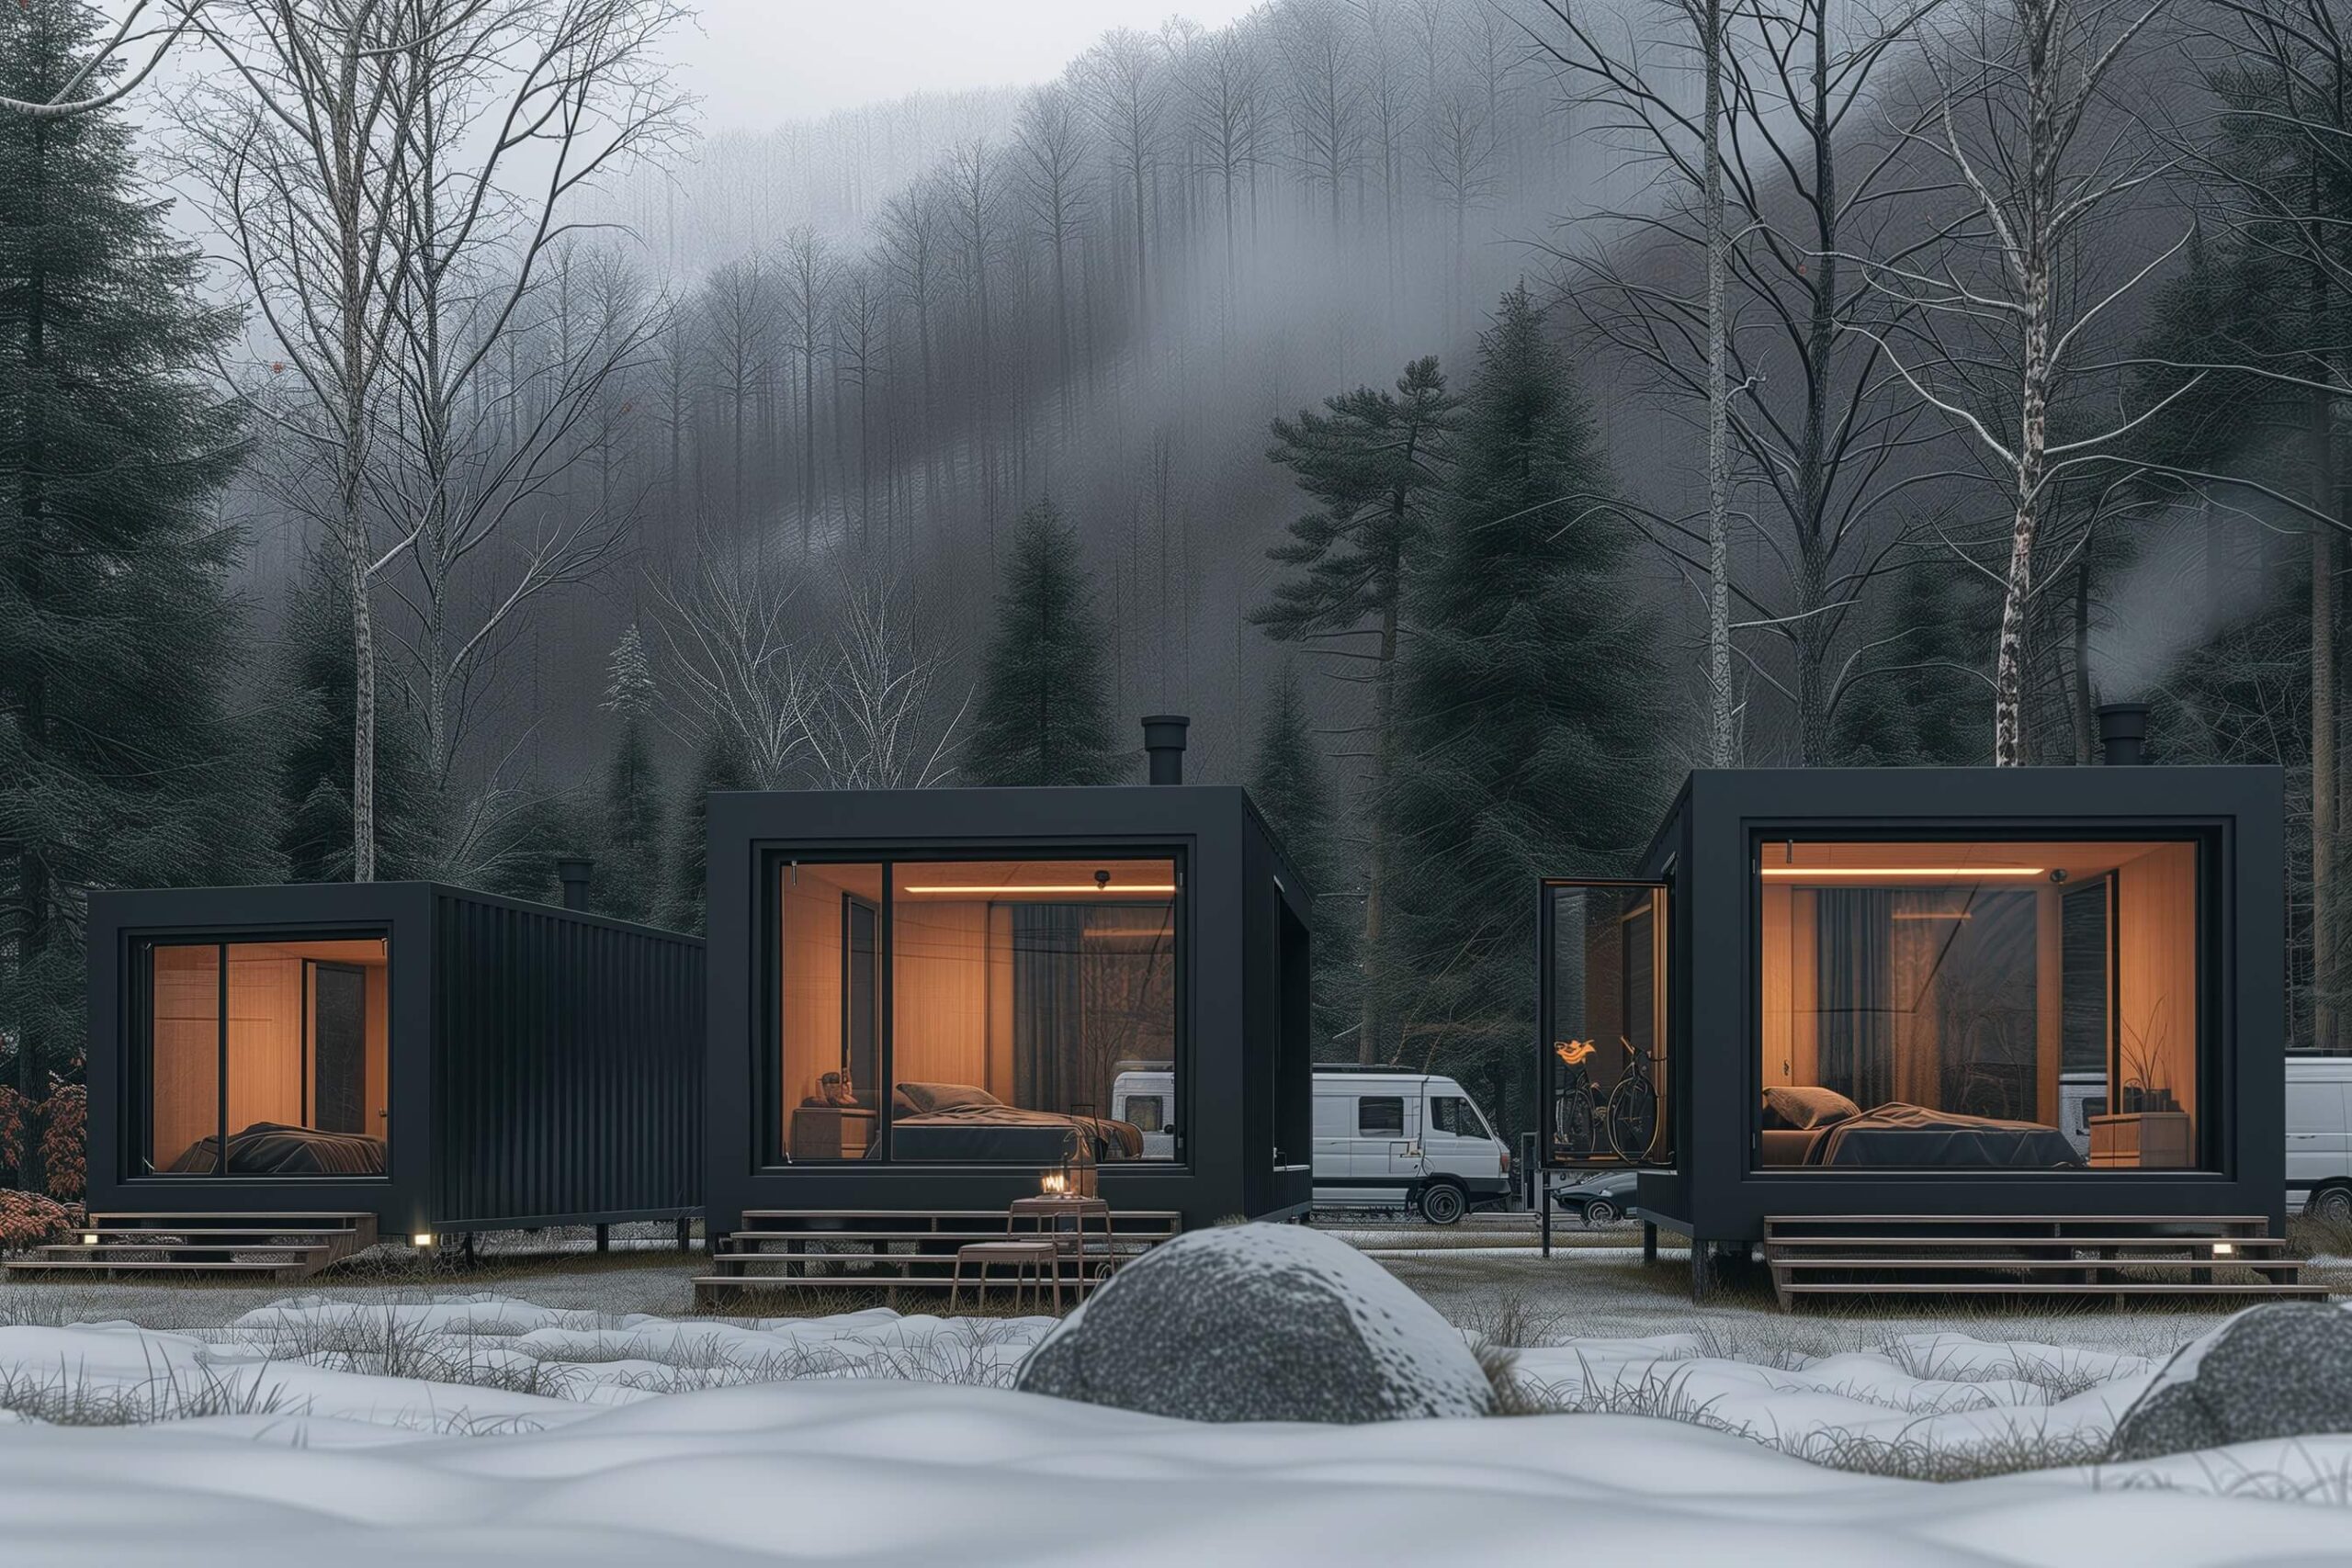 3D visual in Winter of the future Go-Van Village x Montagne Berryman with Go-Boxes and vans. 4 seasons project.